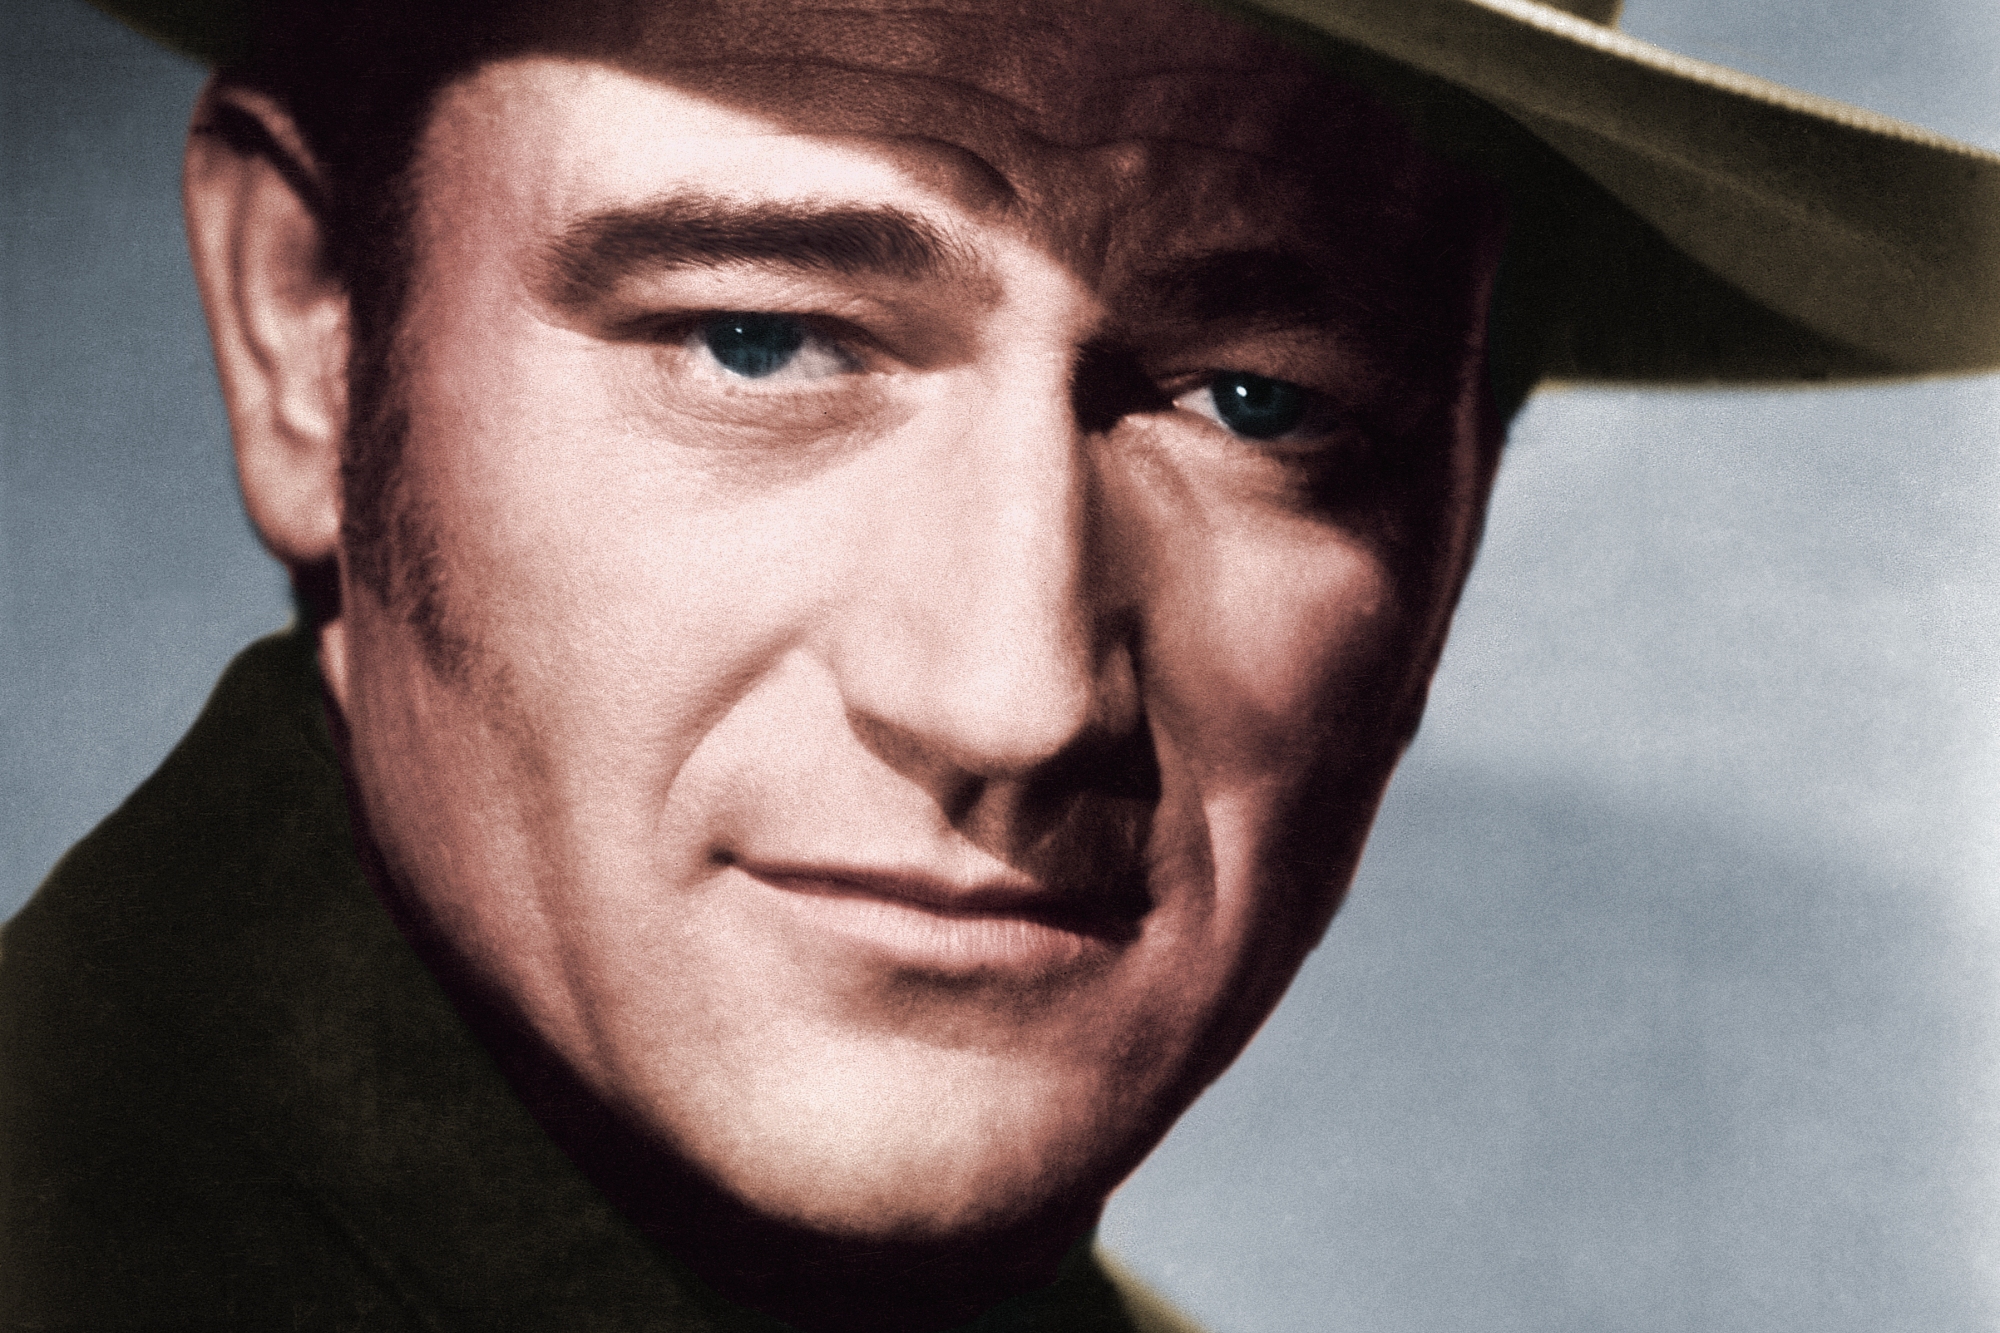 John Wayne, who lived by each phrase. He's wearing a cowboy hat looking at the camera